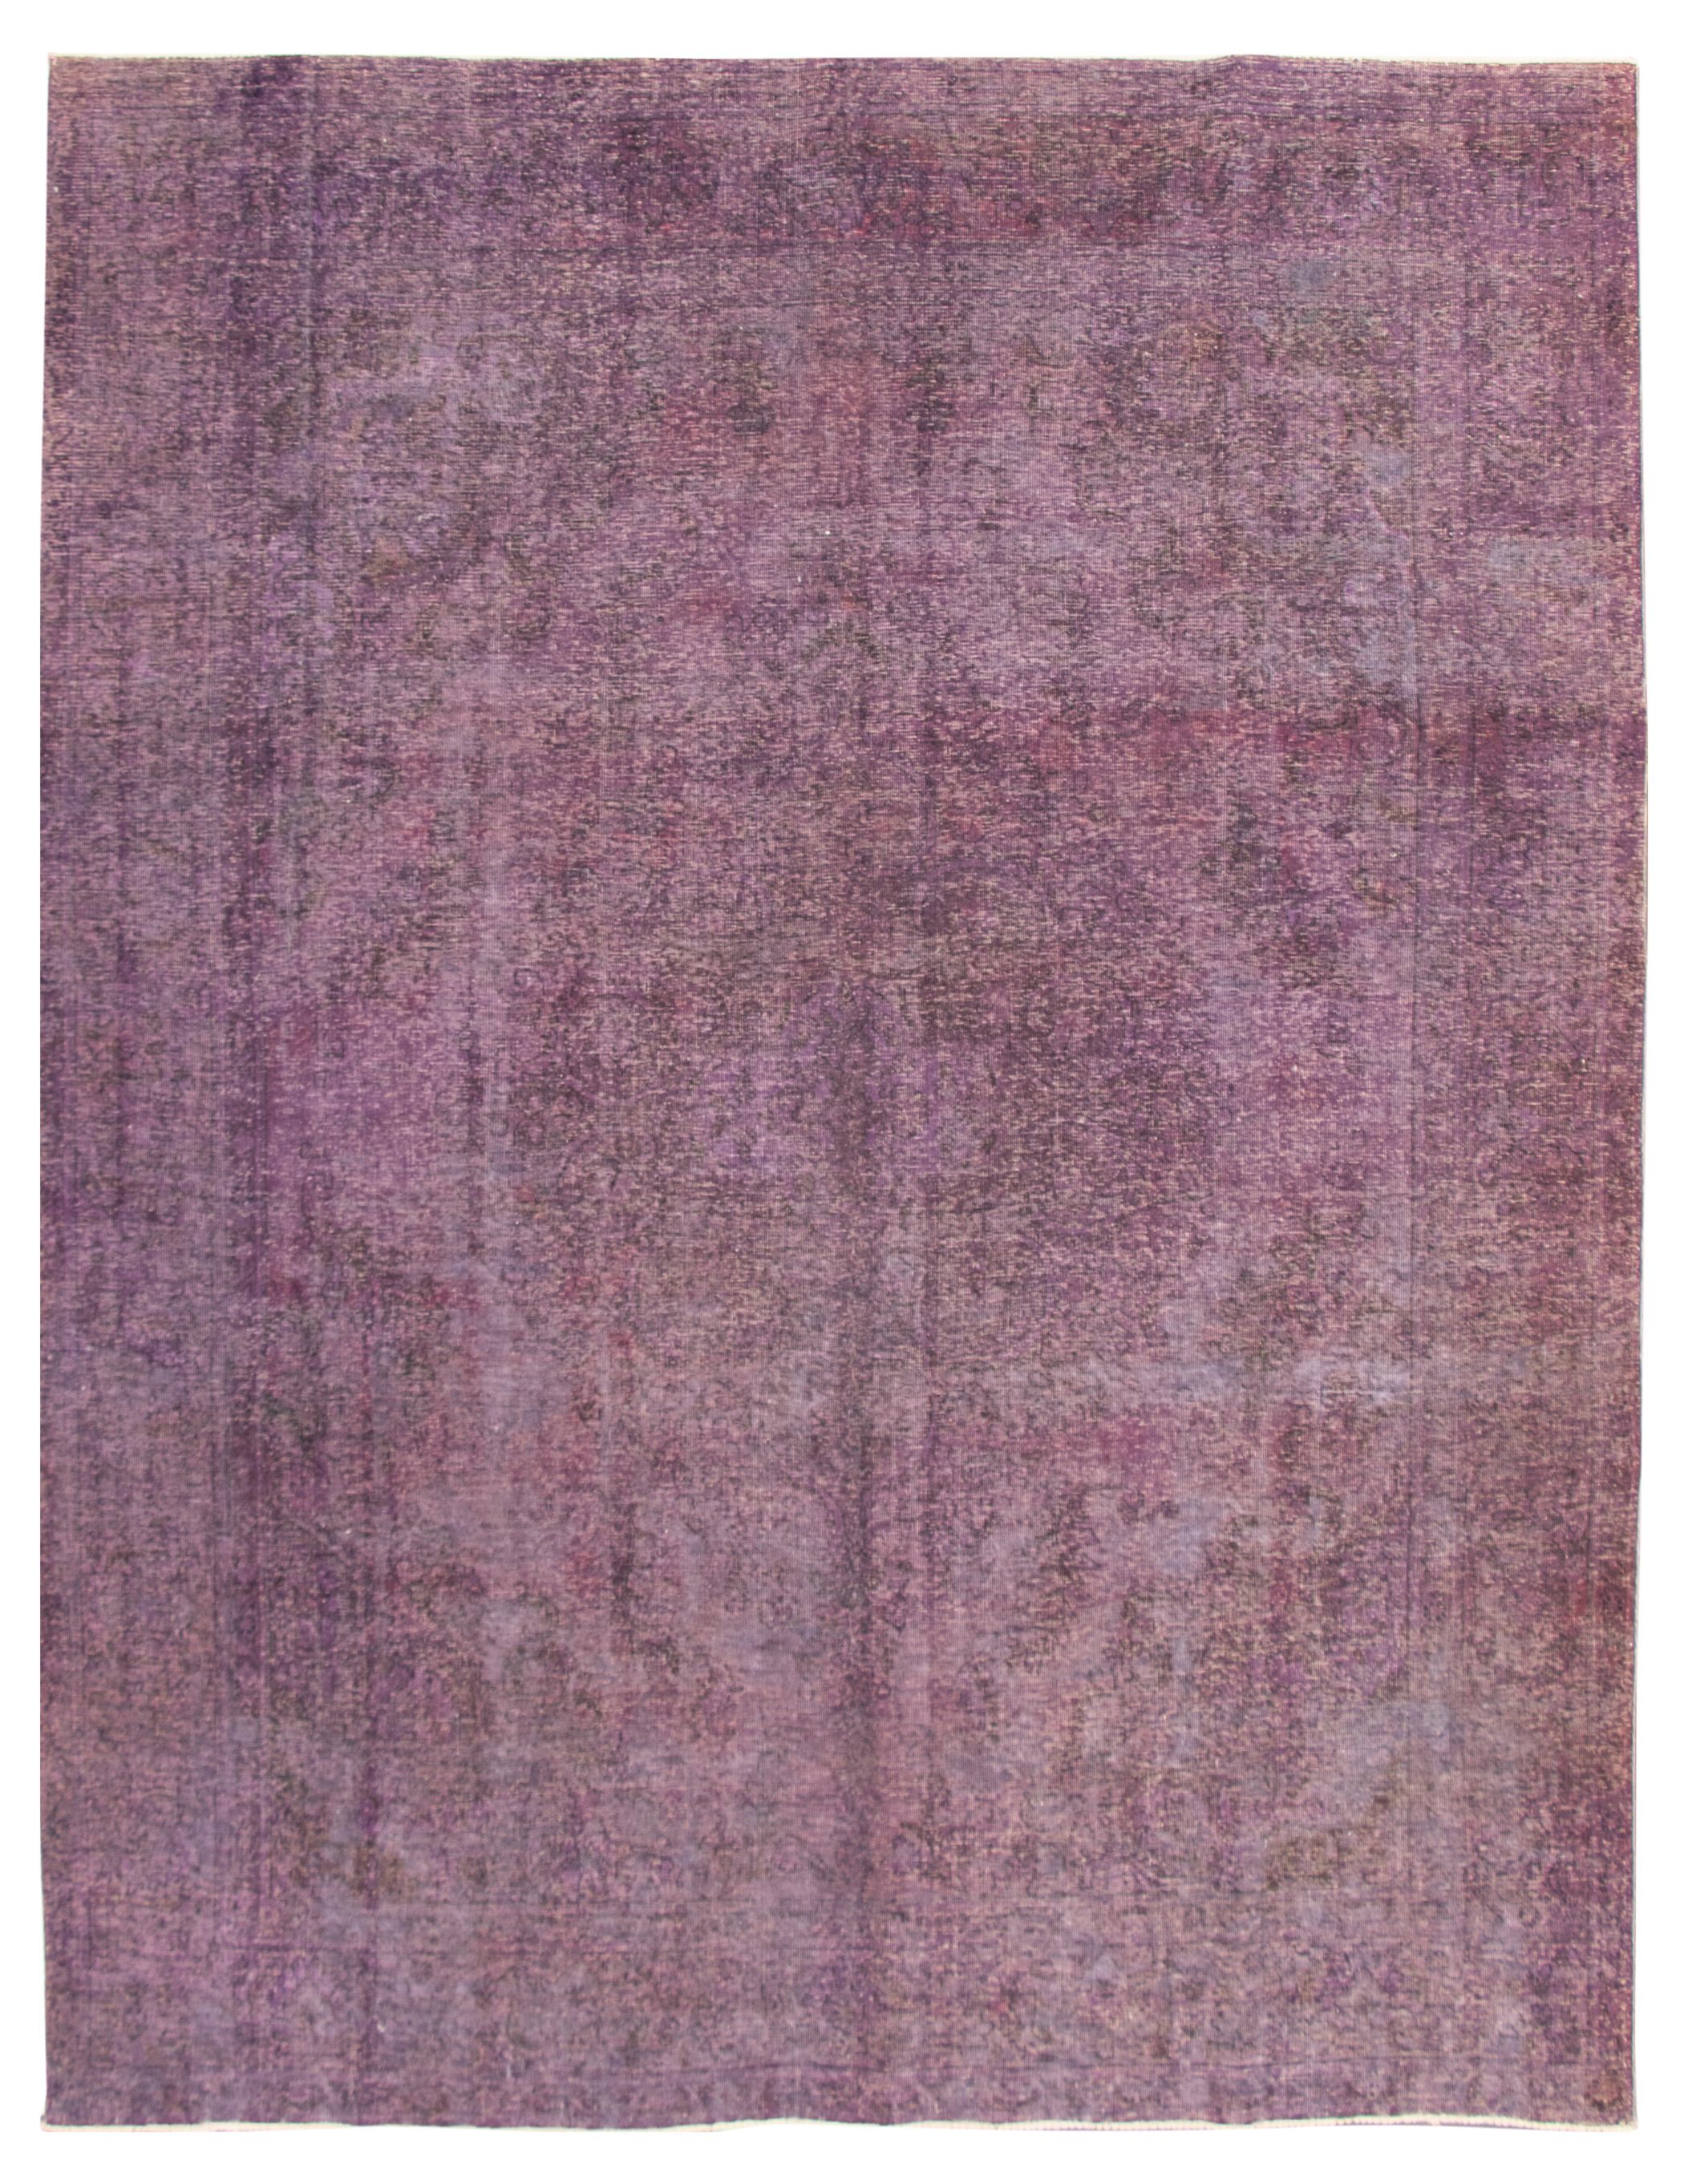 Hand-knotted Color Transition Purple Wool Rug 9'8" x 12'4" Size: 9'8" x 12'4"  